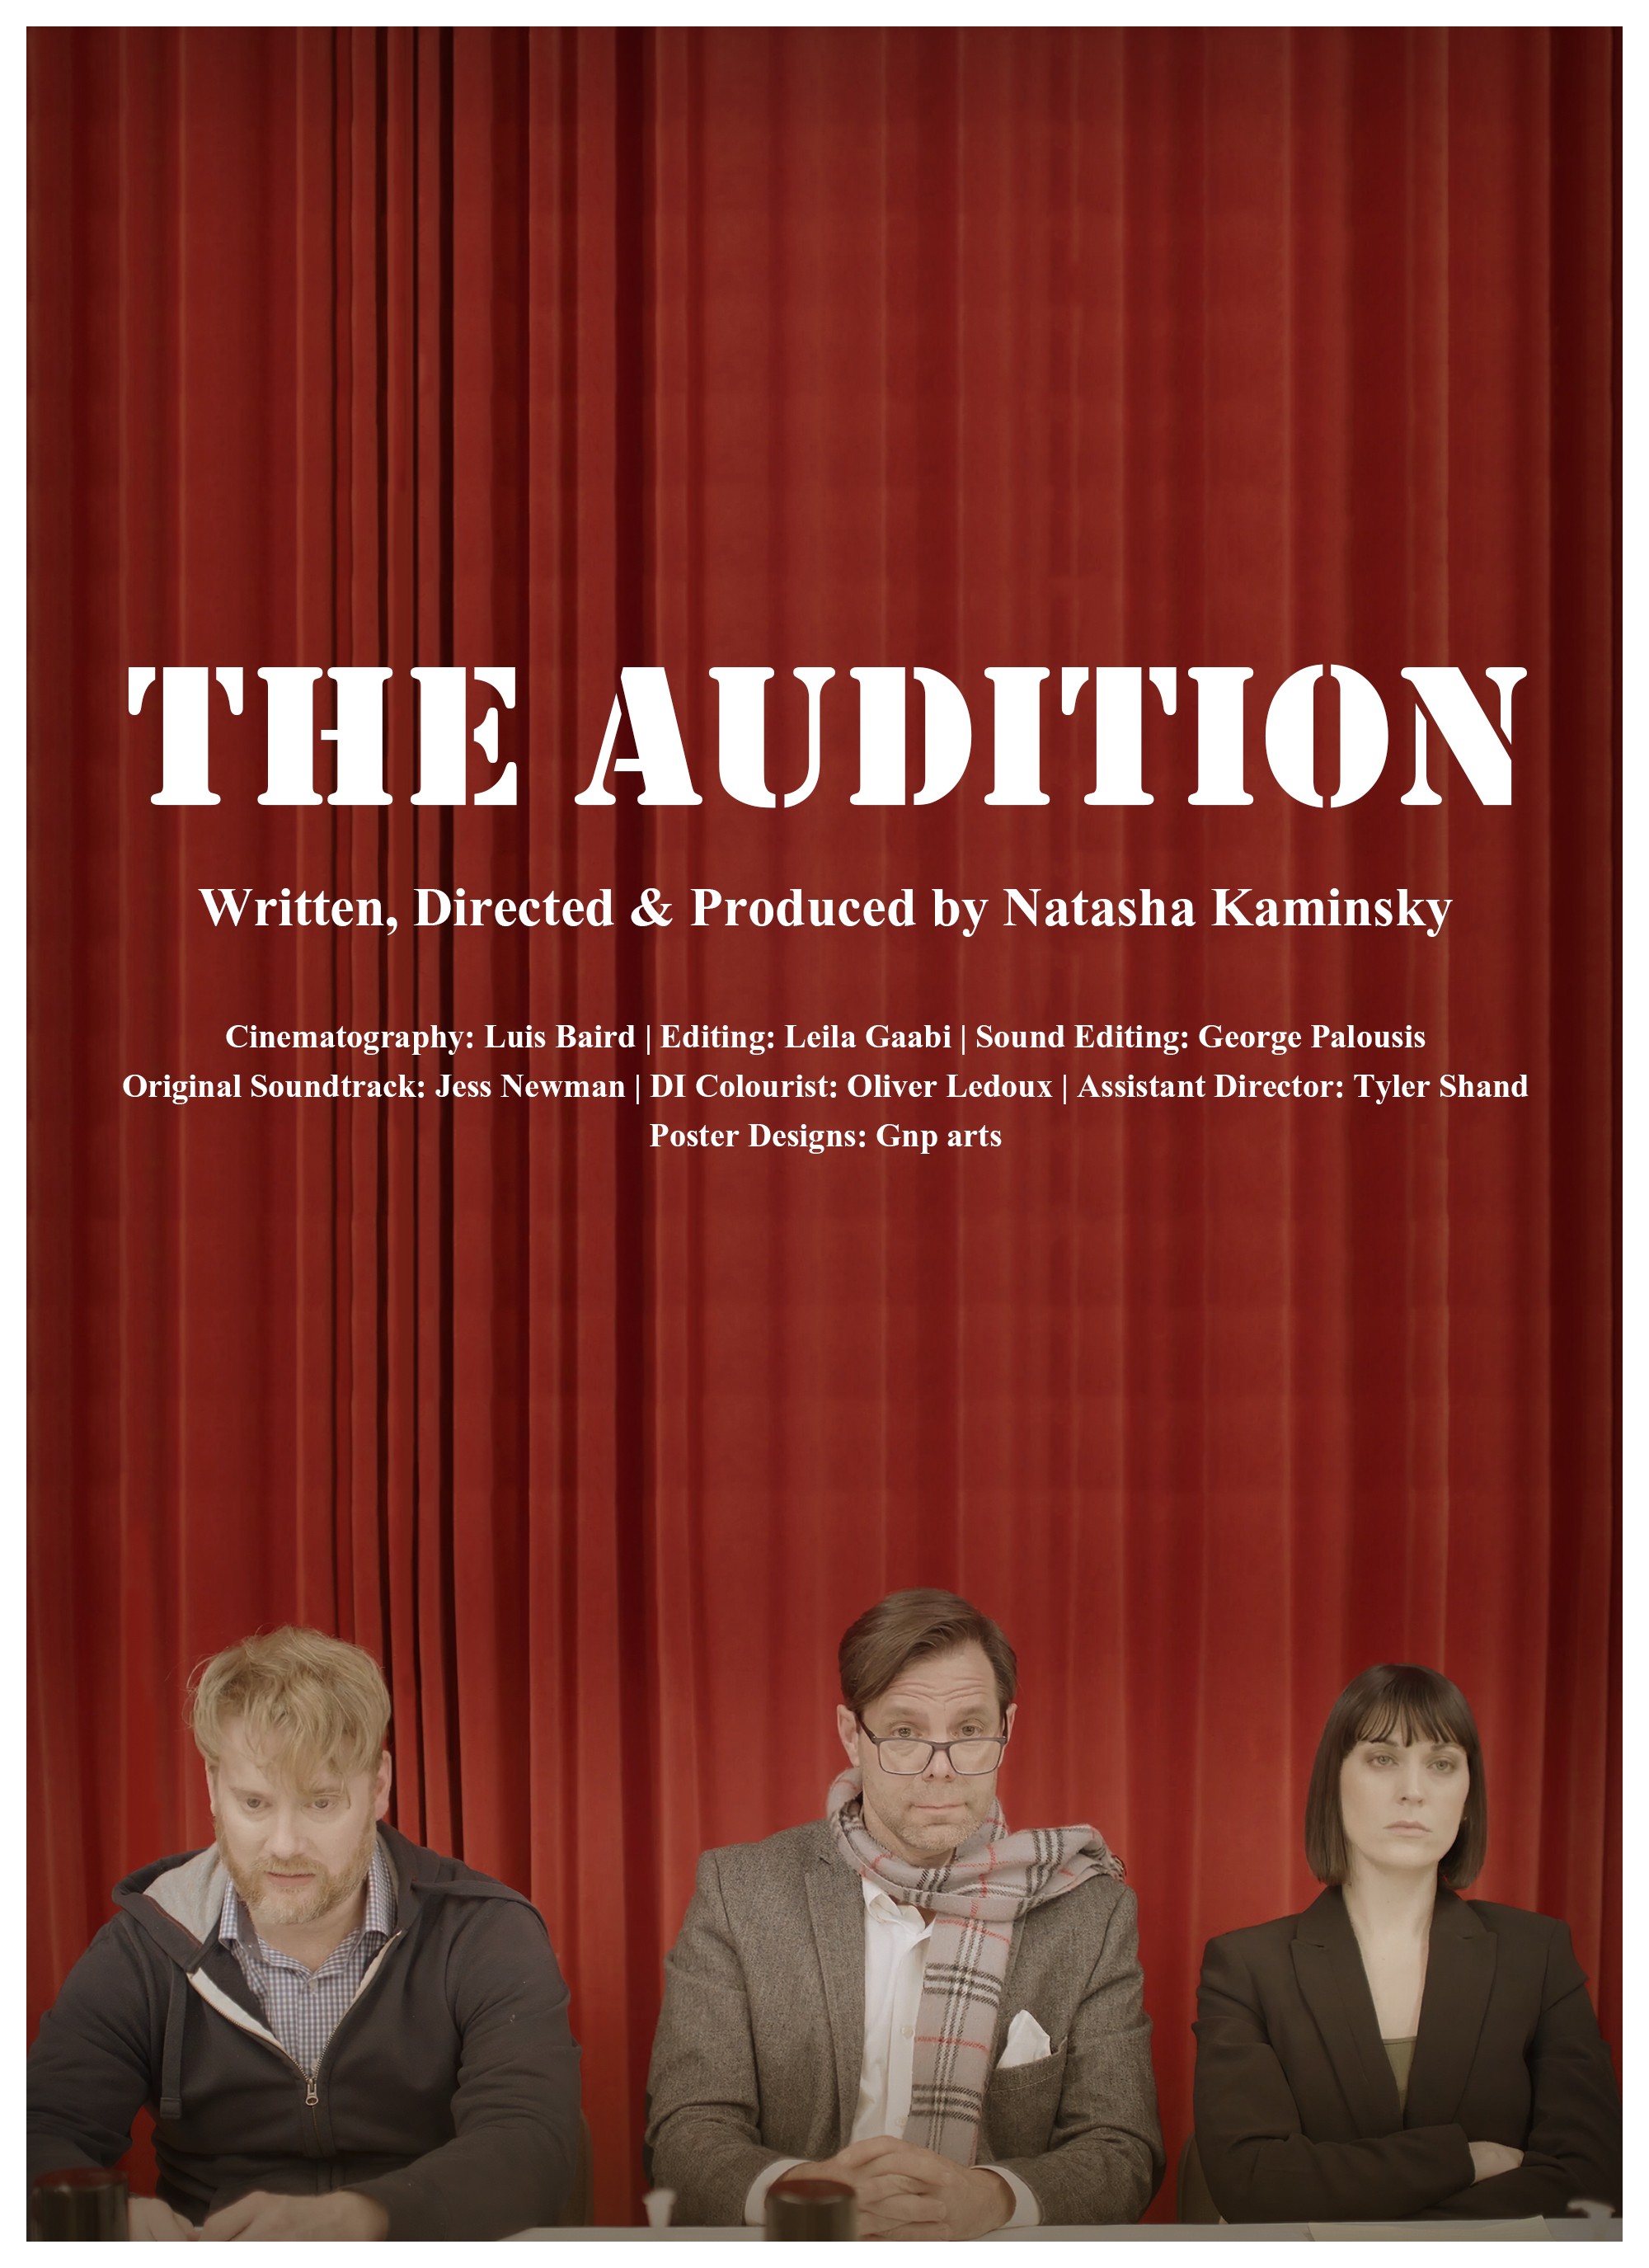 Mega Sized Movie Poster Image for The Audition